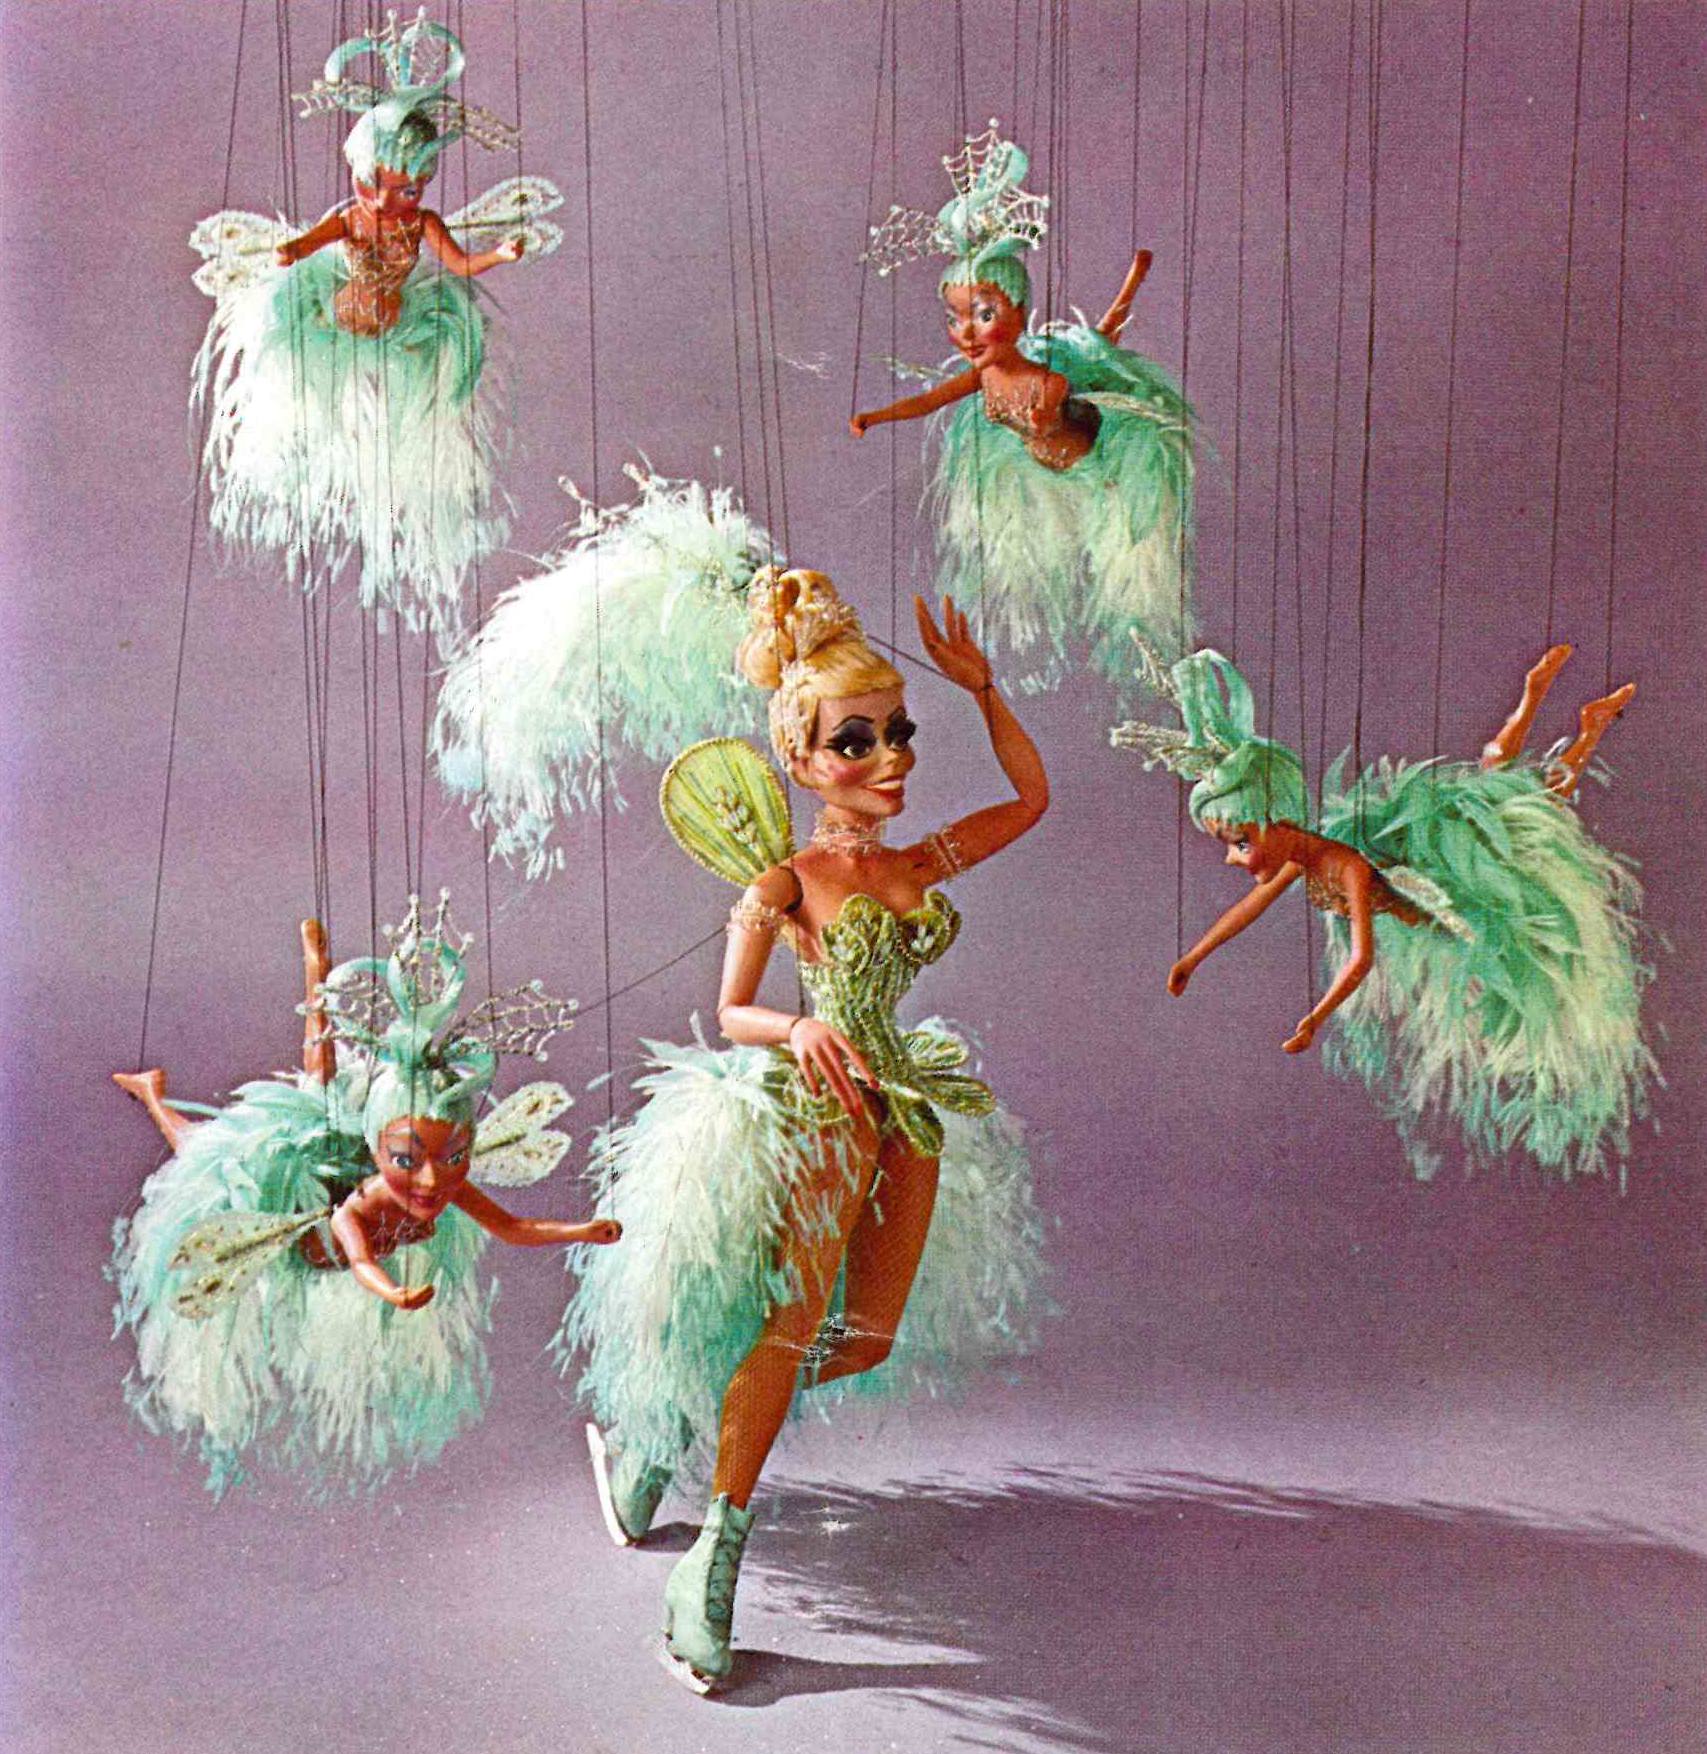 Color photograph of five tanned fairy puppets in green feathered outfits, one ice skating, the rest flying in the air